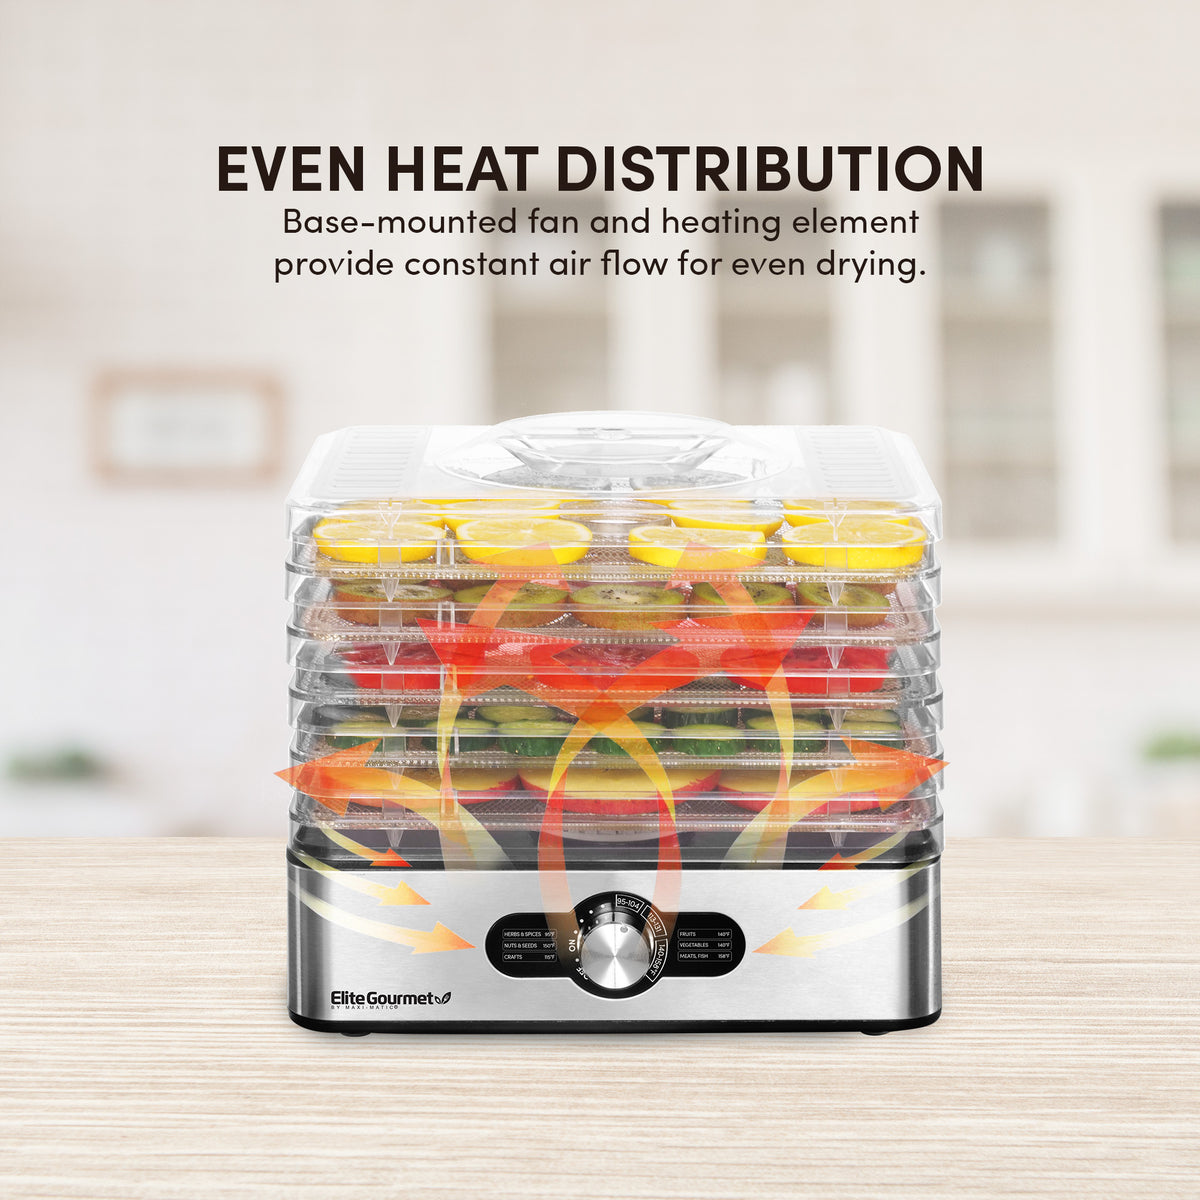 Elite Gourmet EFD770WD Digital Food Dehydrator with 5x12.5” BPA Free Trays,  Adjustable Time and Temperature Controls, Jerky, Herbs, Fruit, Veggies,  Snacks, White - Yahoo Shopping